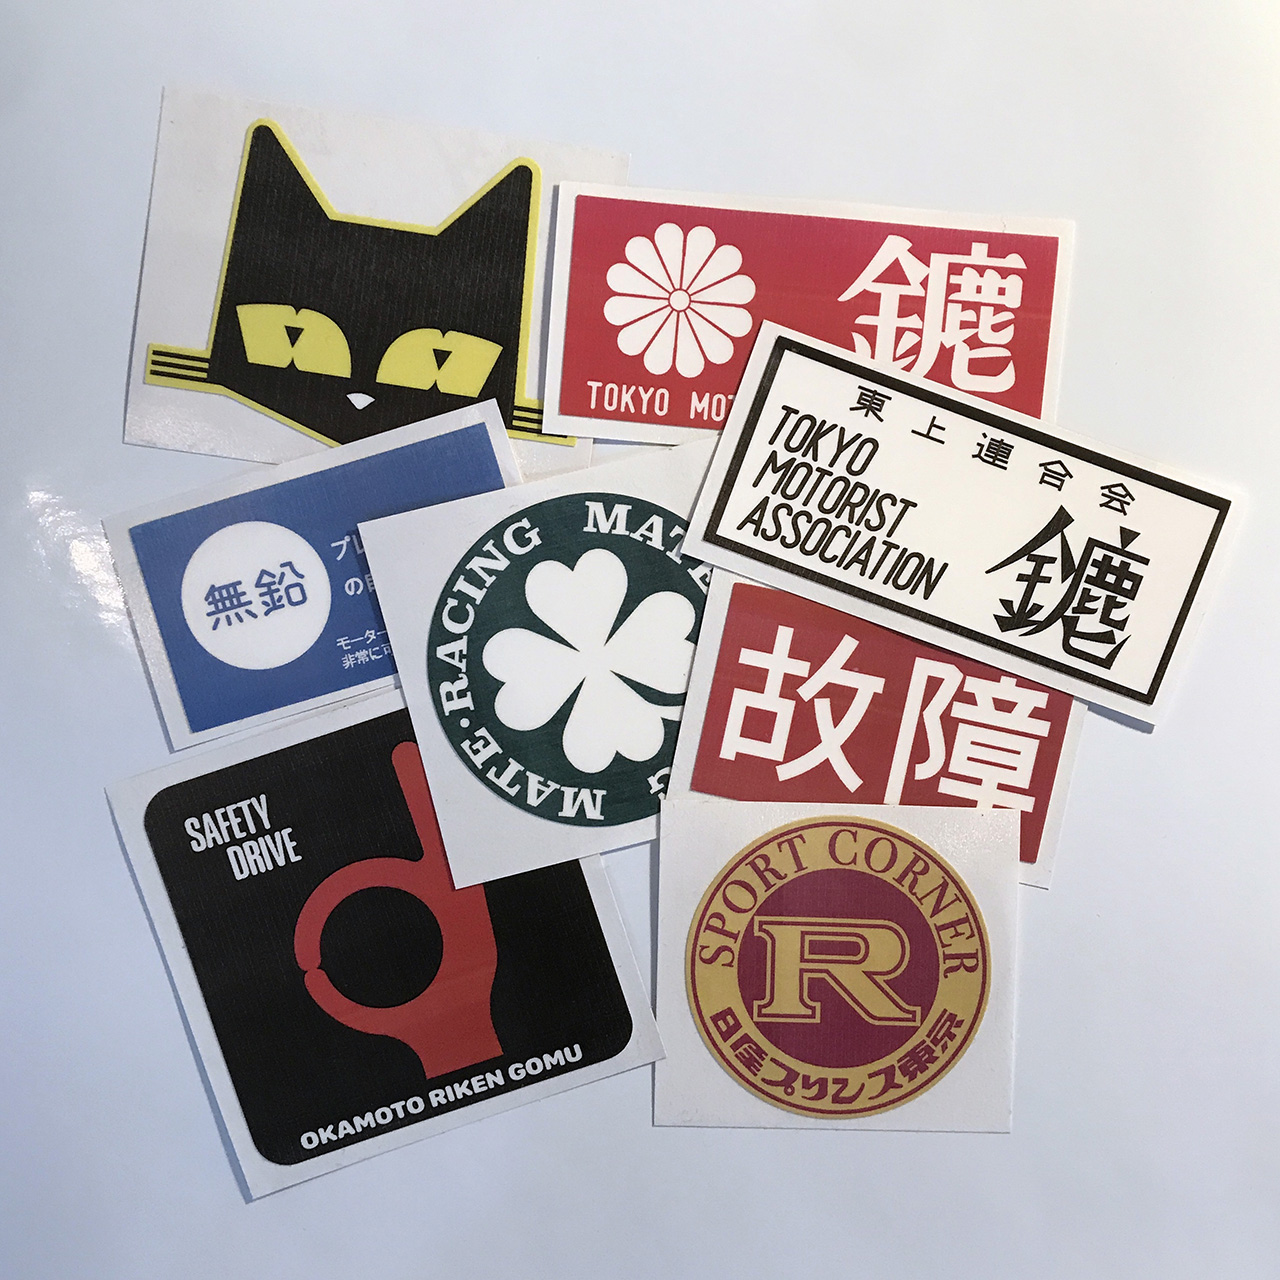 A set of vintage JDM (Japan Domestic Market) stickers from 70s and 80s. JDM sticker pack for cars and motorcycles. Inspired by oldschool Bosozoku street culture.